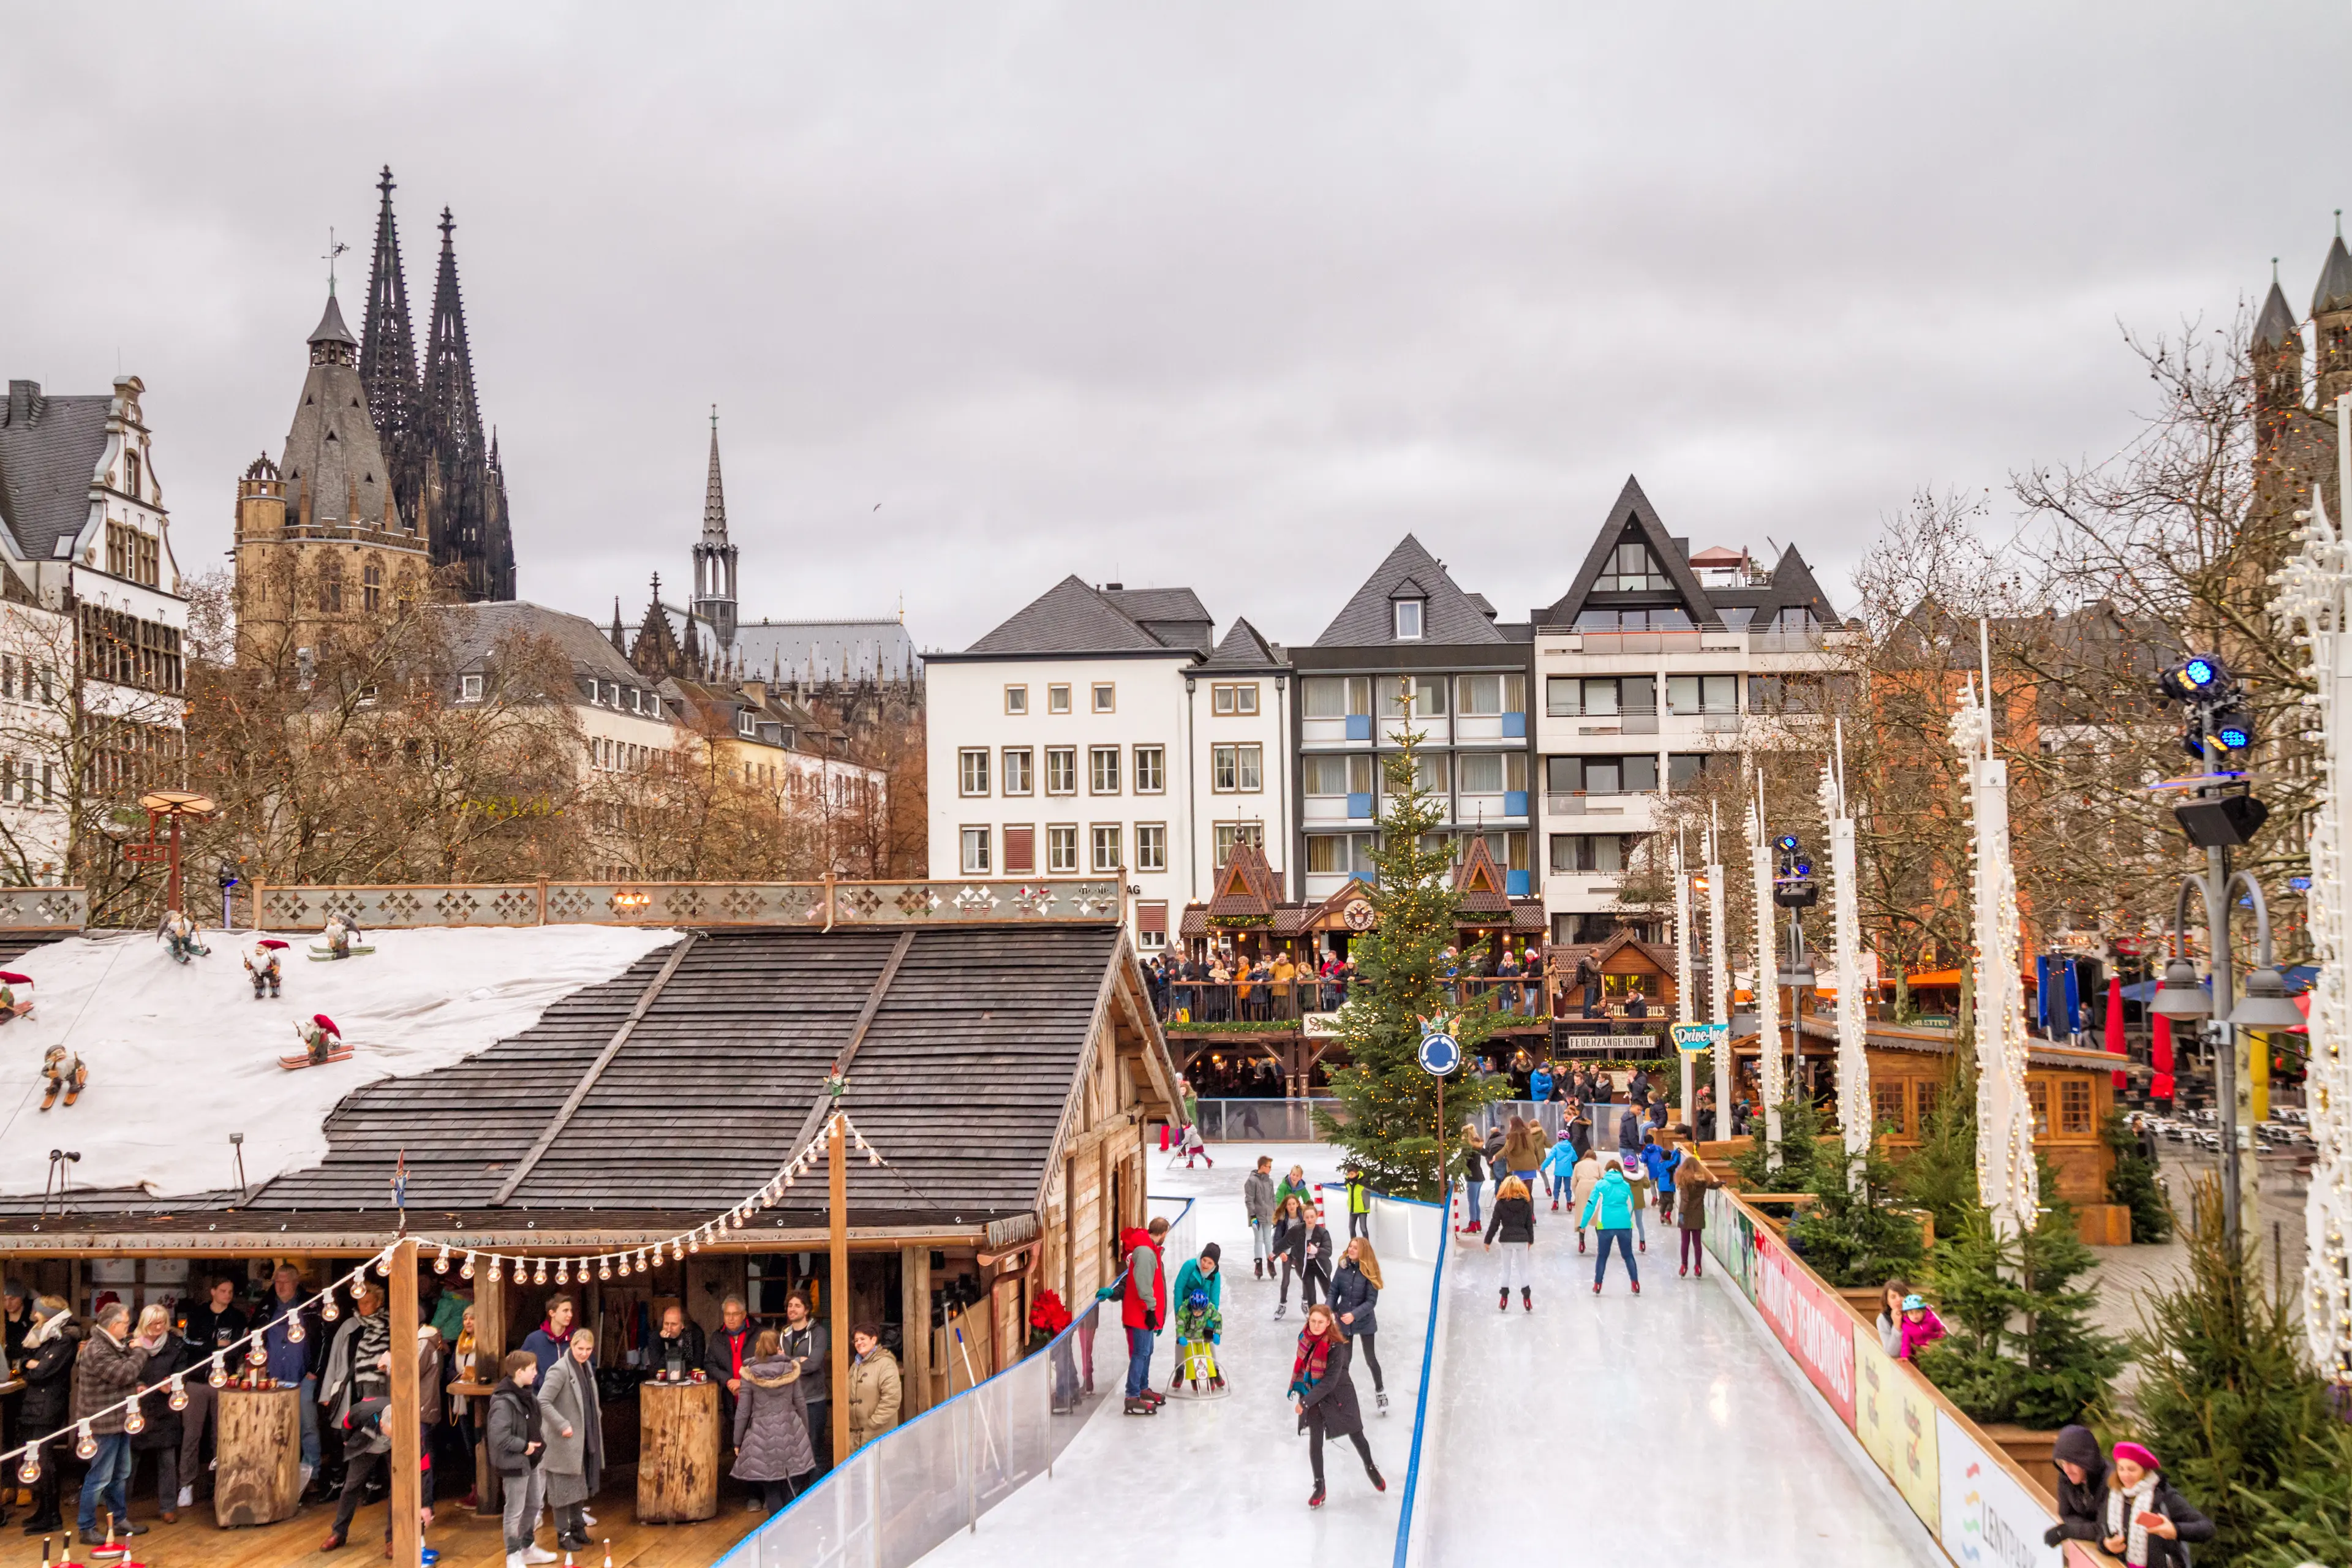 View of the Christmas city skating rink on background the Cologne Cathedral